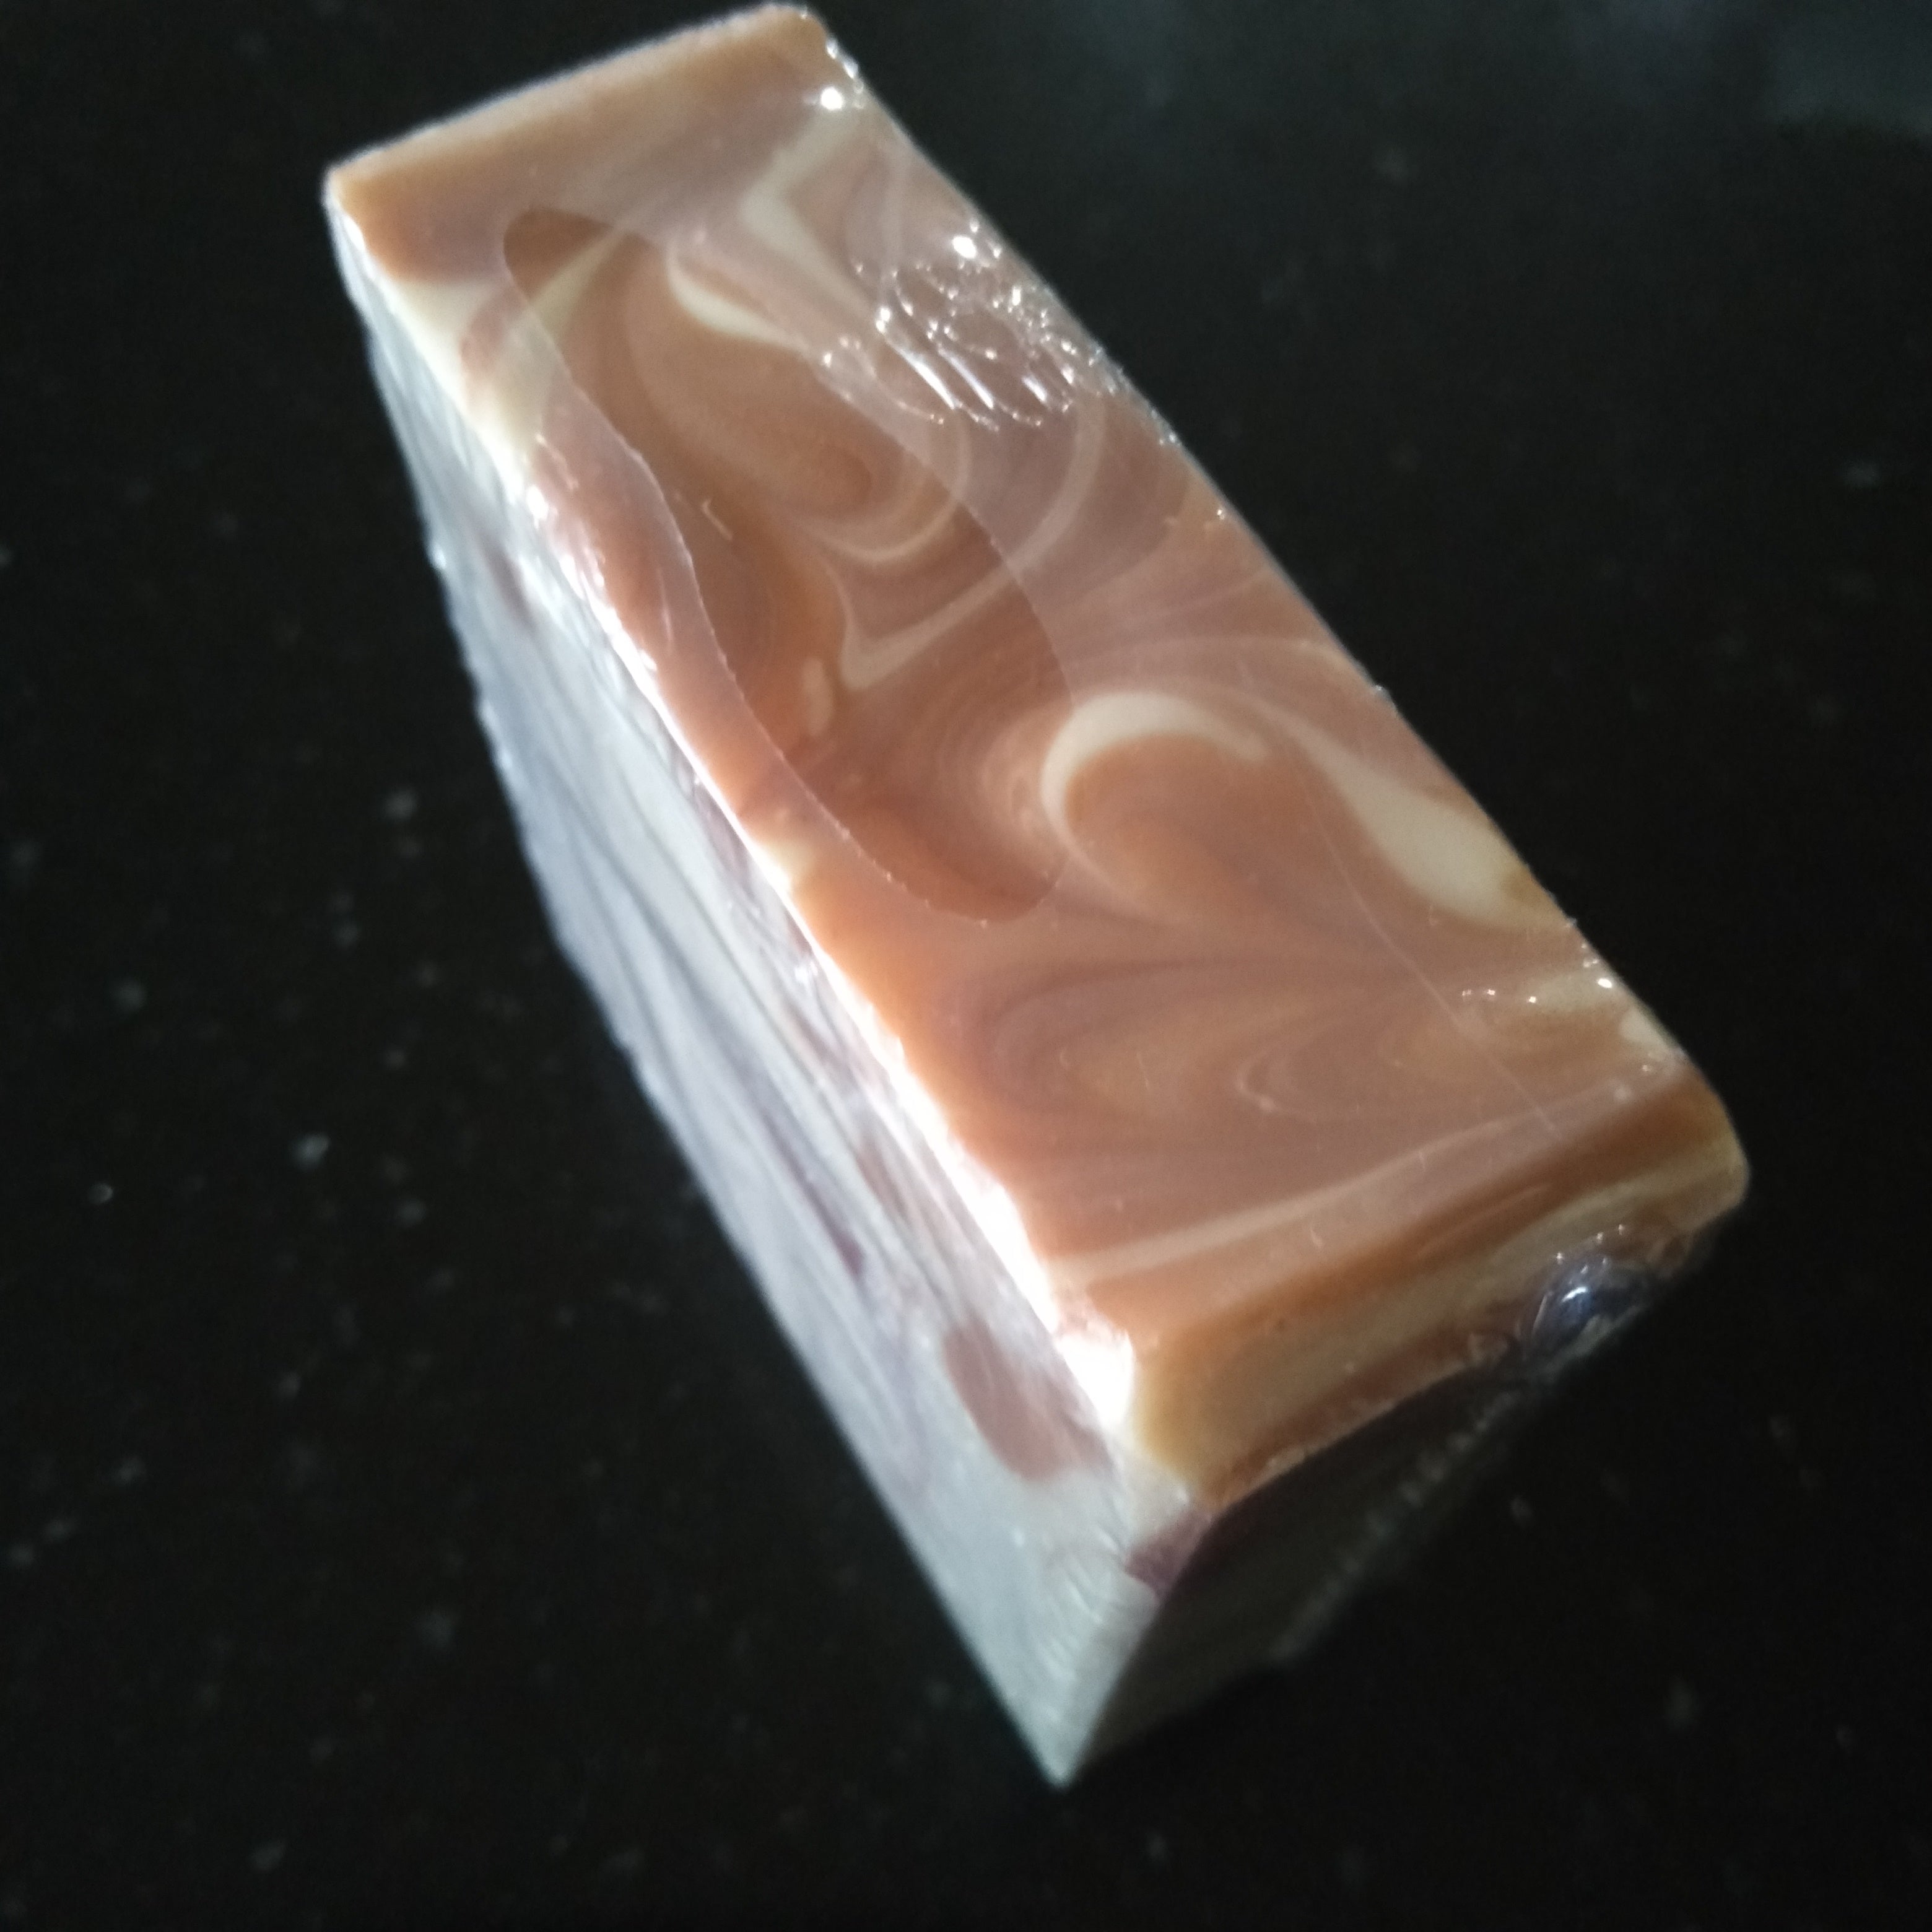 AMBERED SANDALWOOD - Hand-made Cold-process Soap